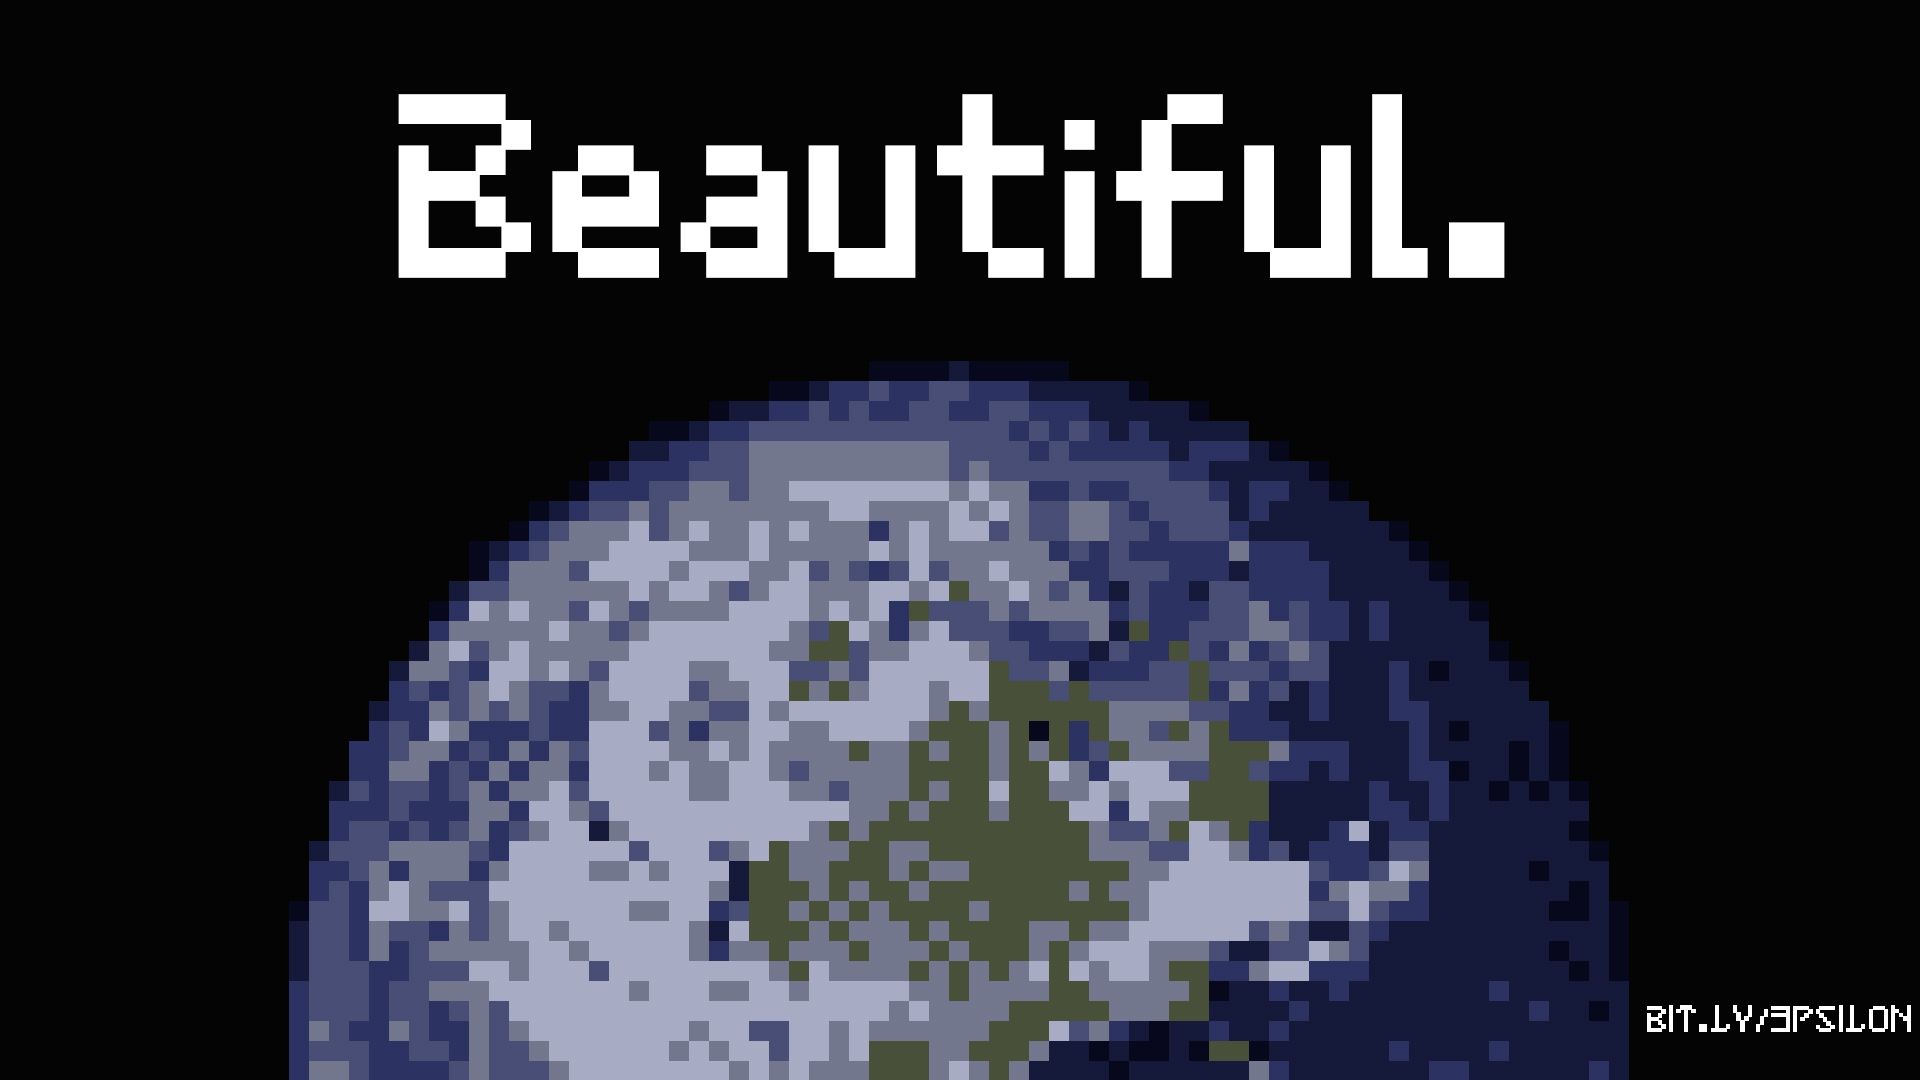 A pixel art of the earth with text that says beautiful - Pixel art